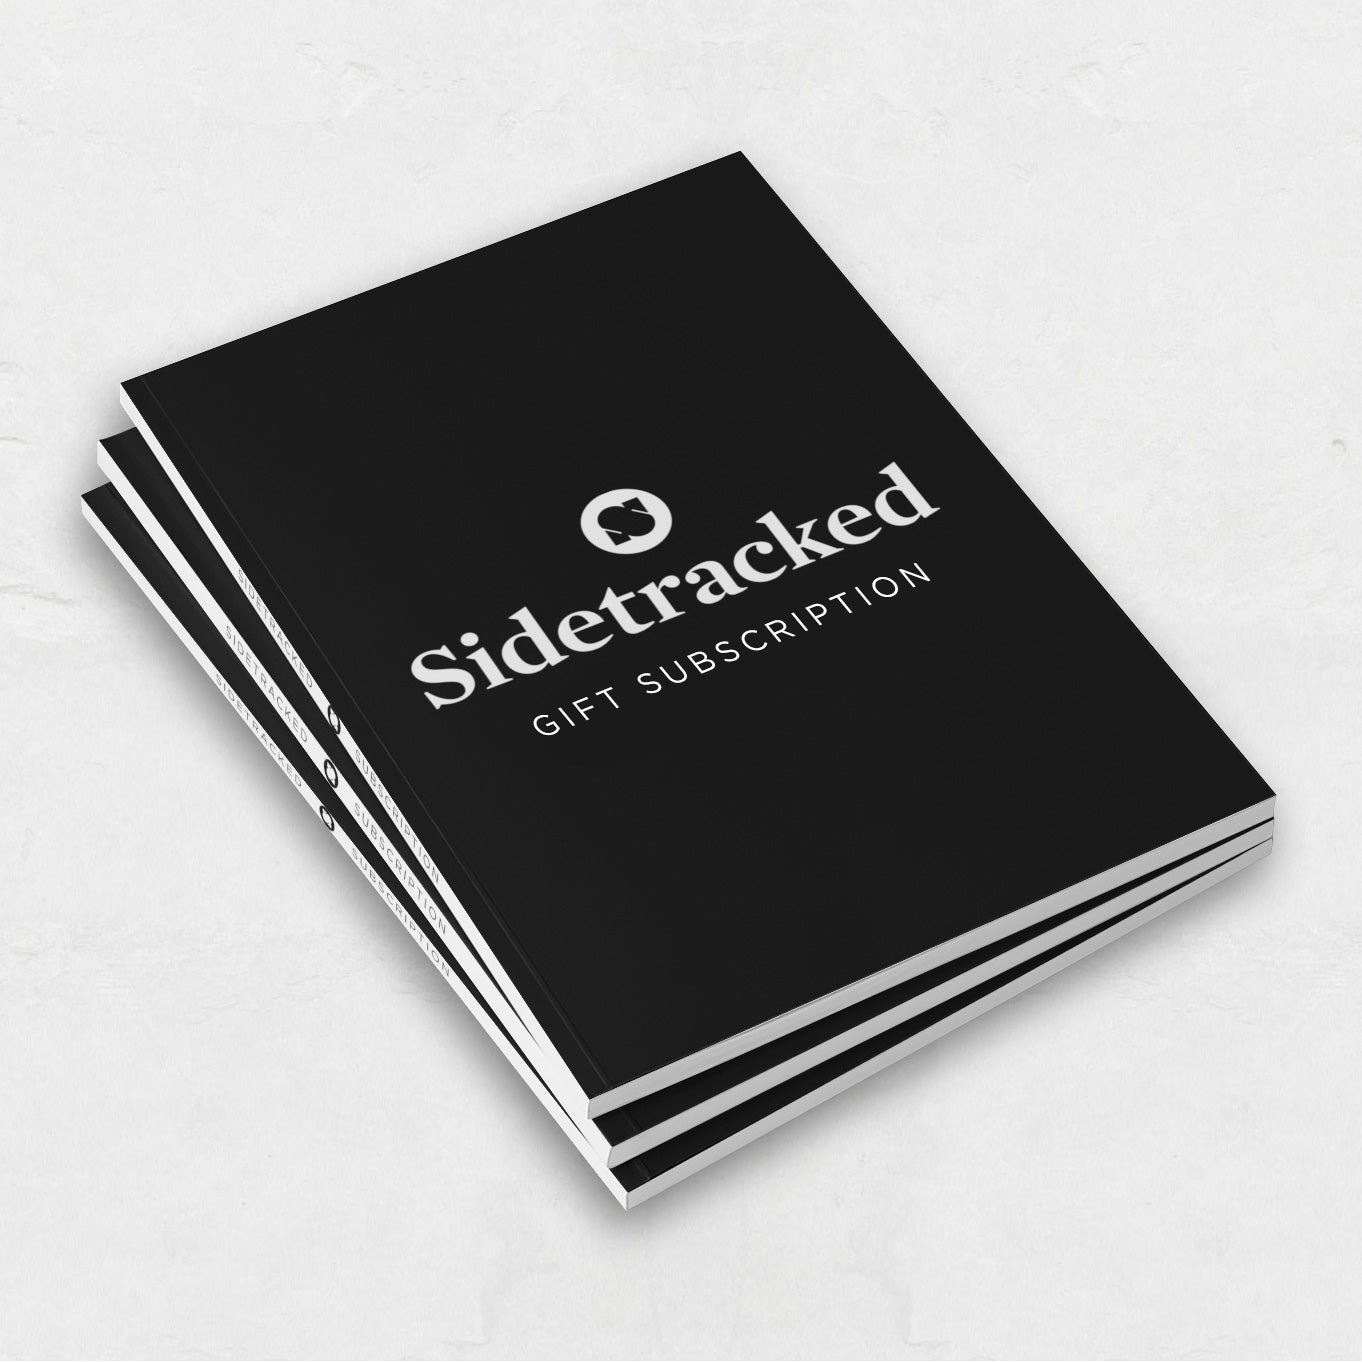 Sidetracked 2024 Gift Subscription